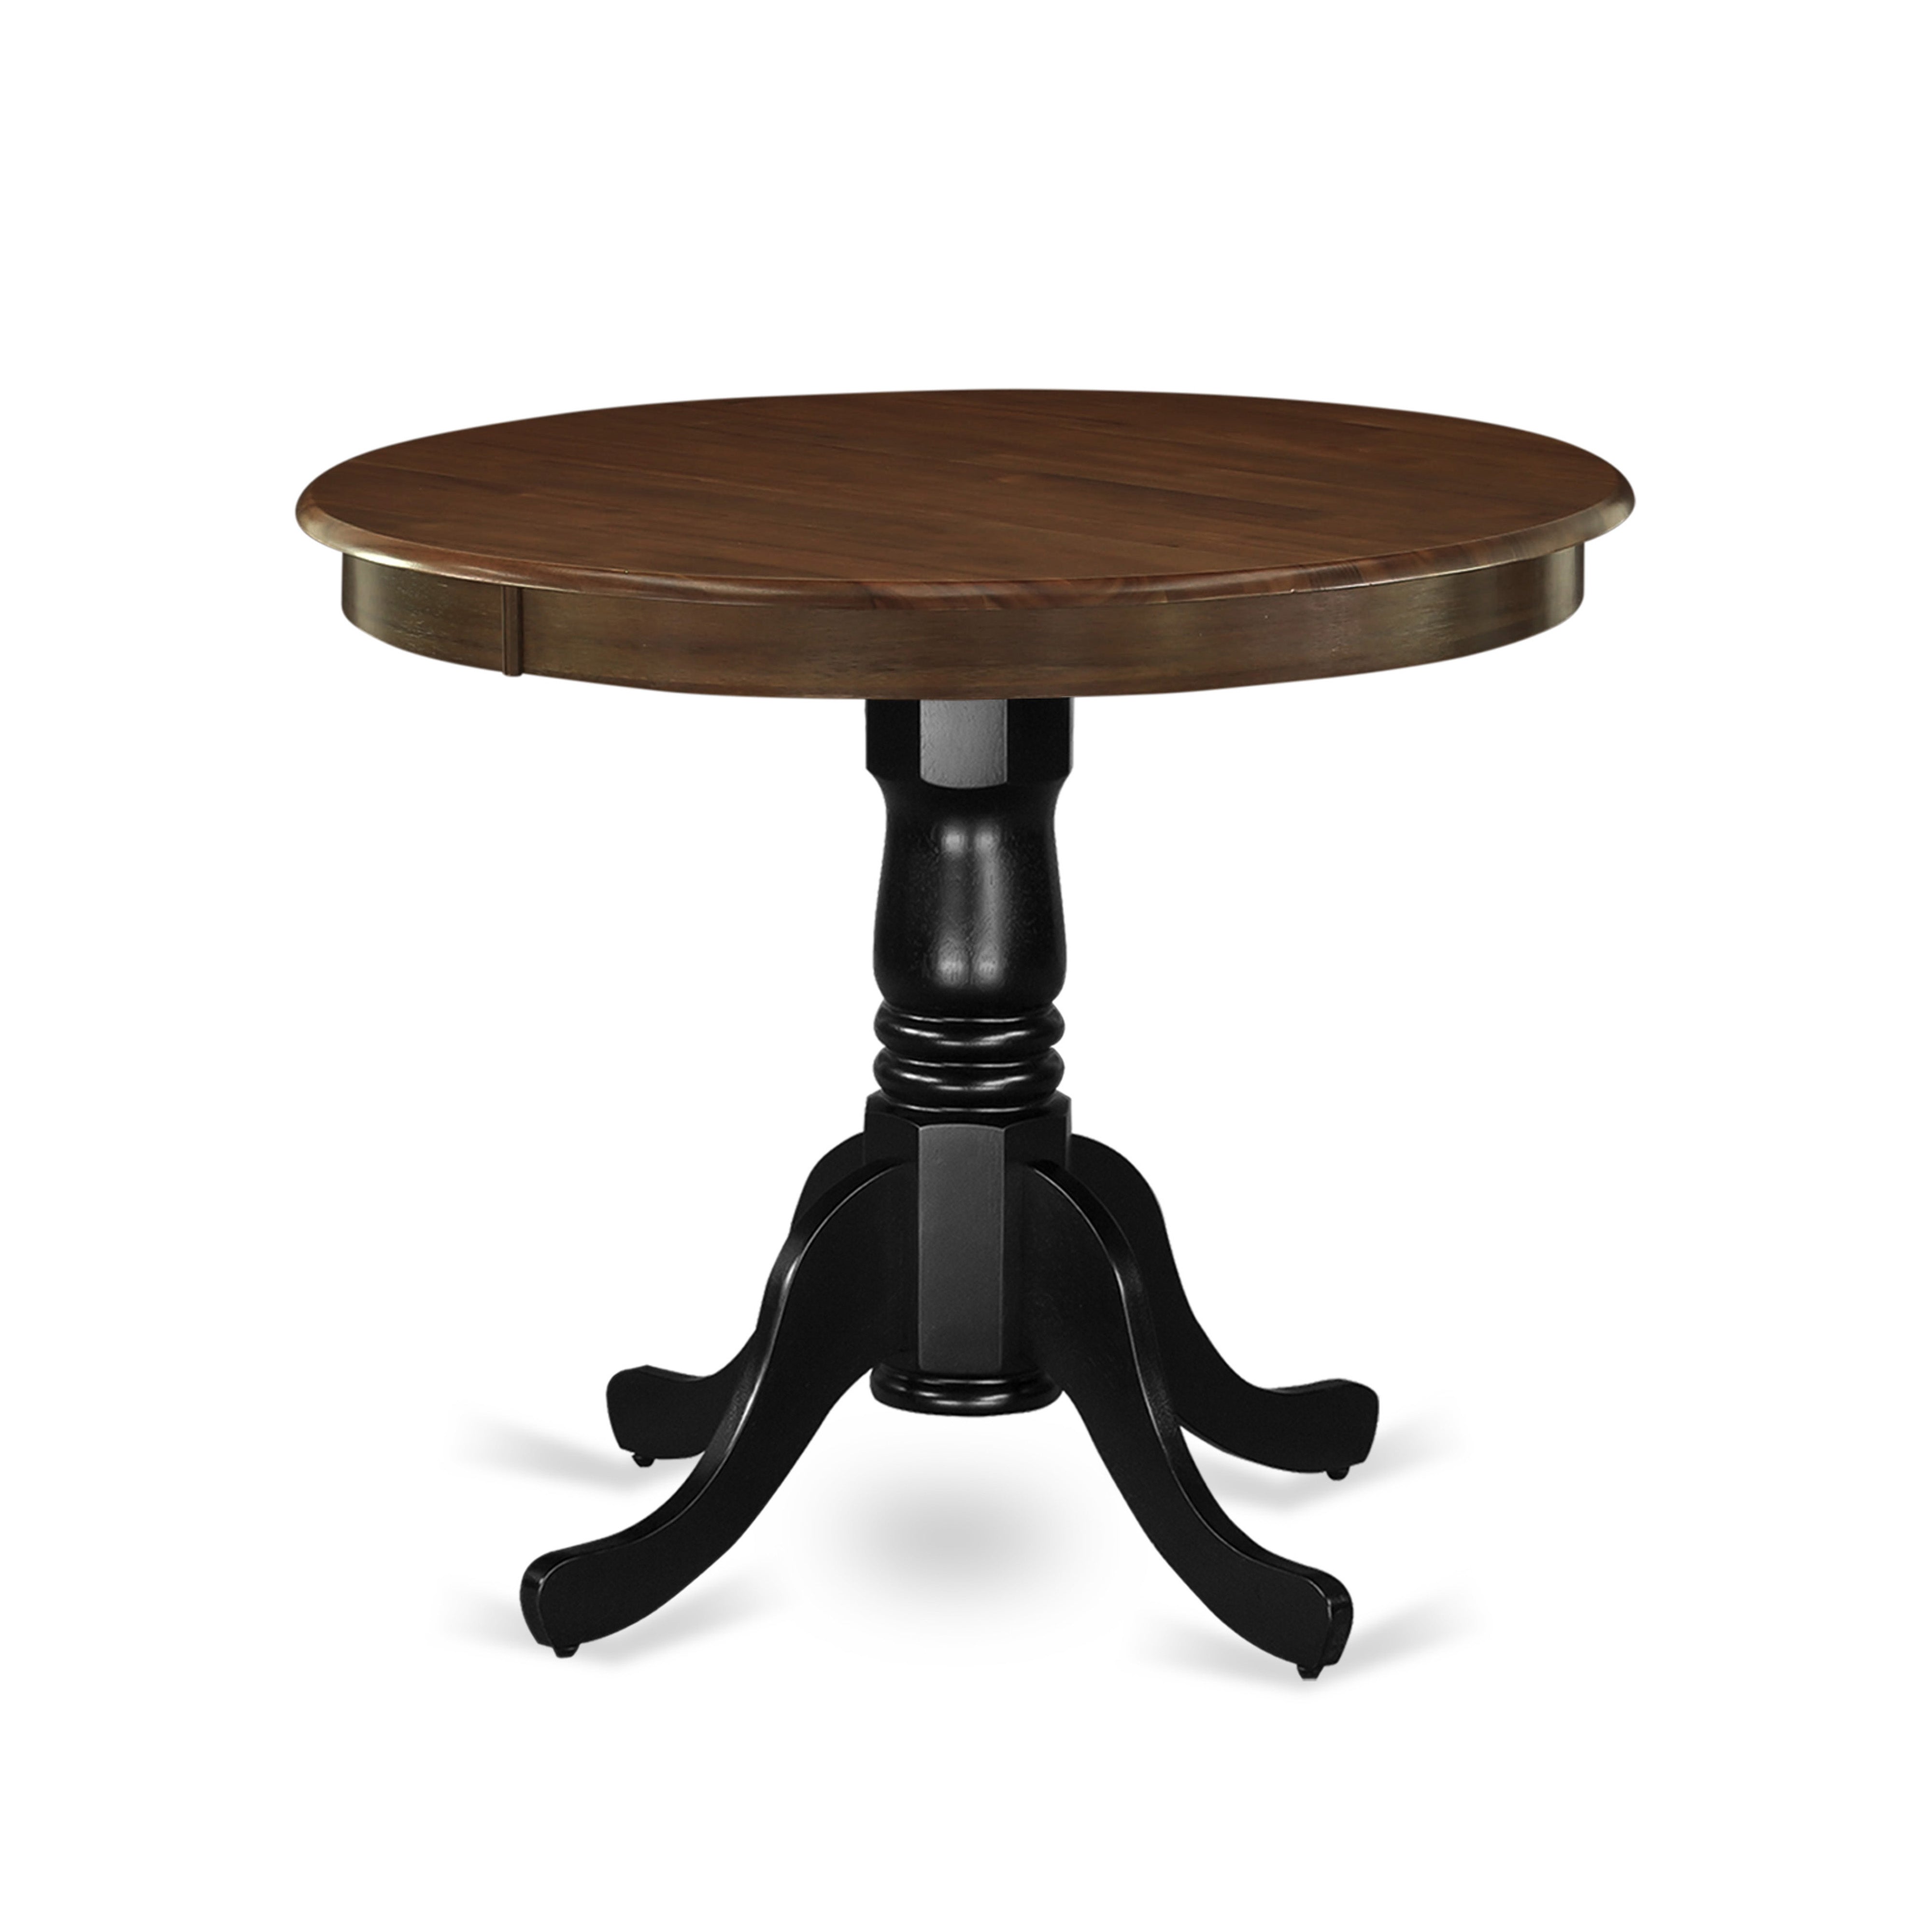 AMT-WBK-TP Antique Dining Table Made of Rubber Wood offering Walnut Finish Table Top, 36 Inch Round, Wirebrushed Black Pedestal